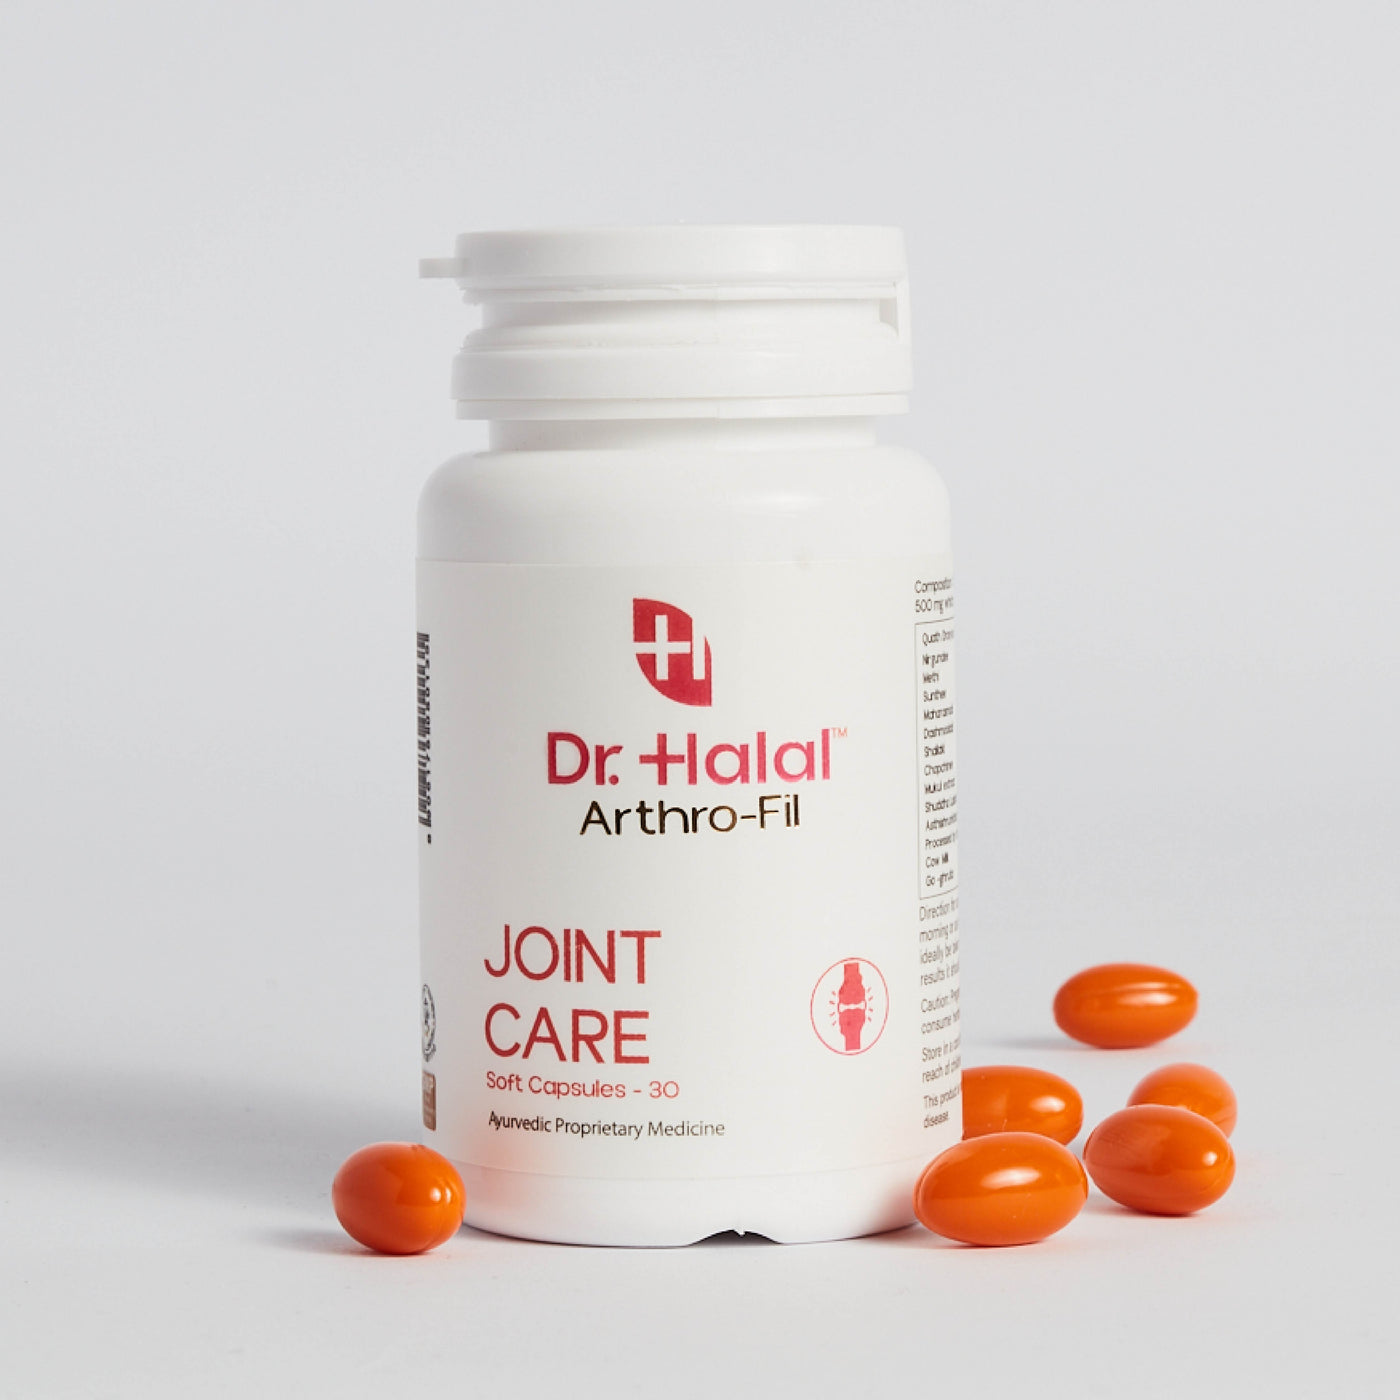 ARTHRO-FIL - Joint Care Capsules 30 Soft Capsules | 500mg per Capsule: Nourishing Your Joints, One Capsule at a Time